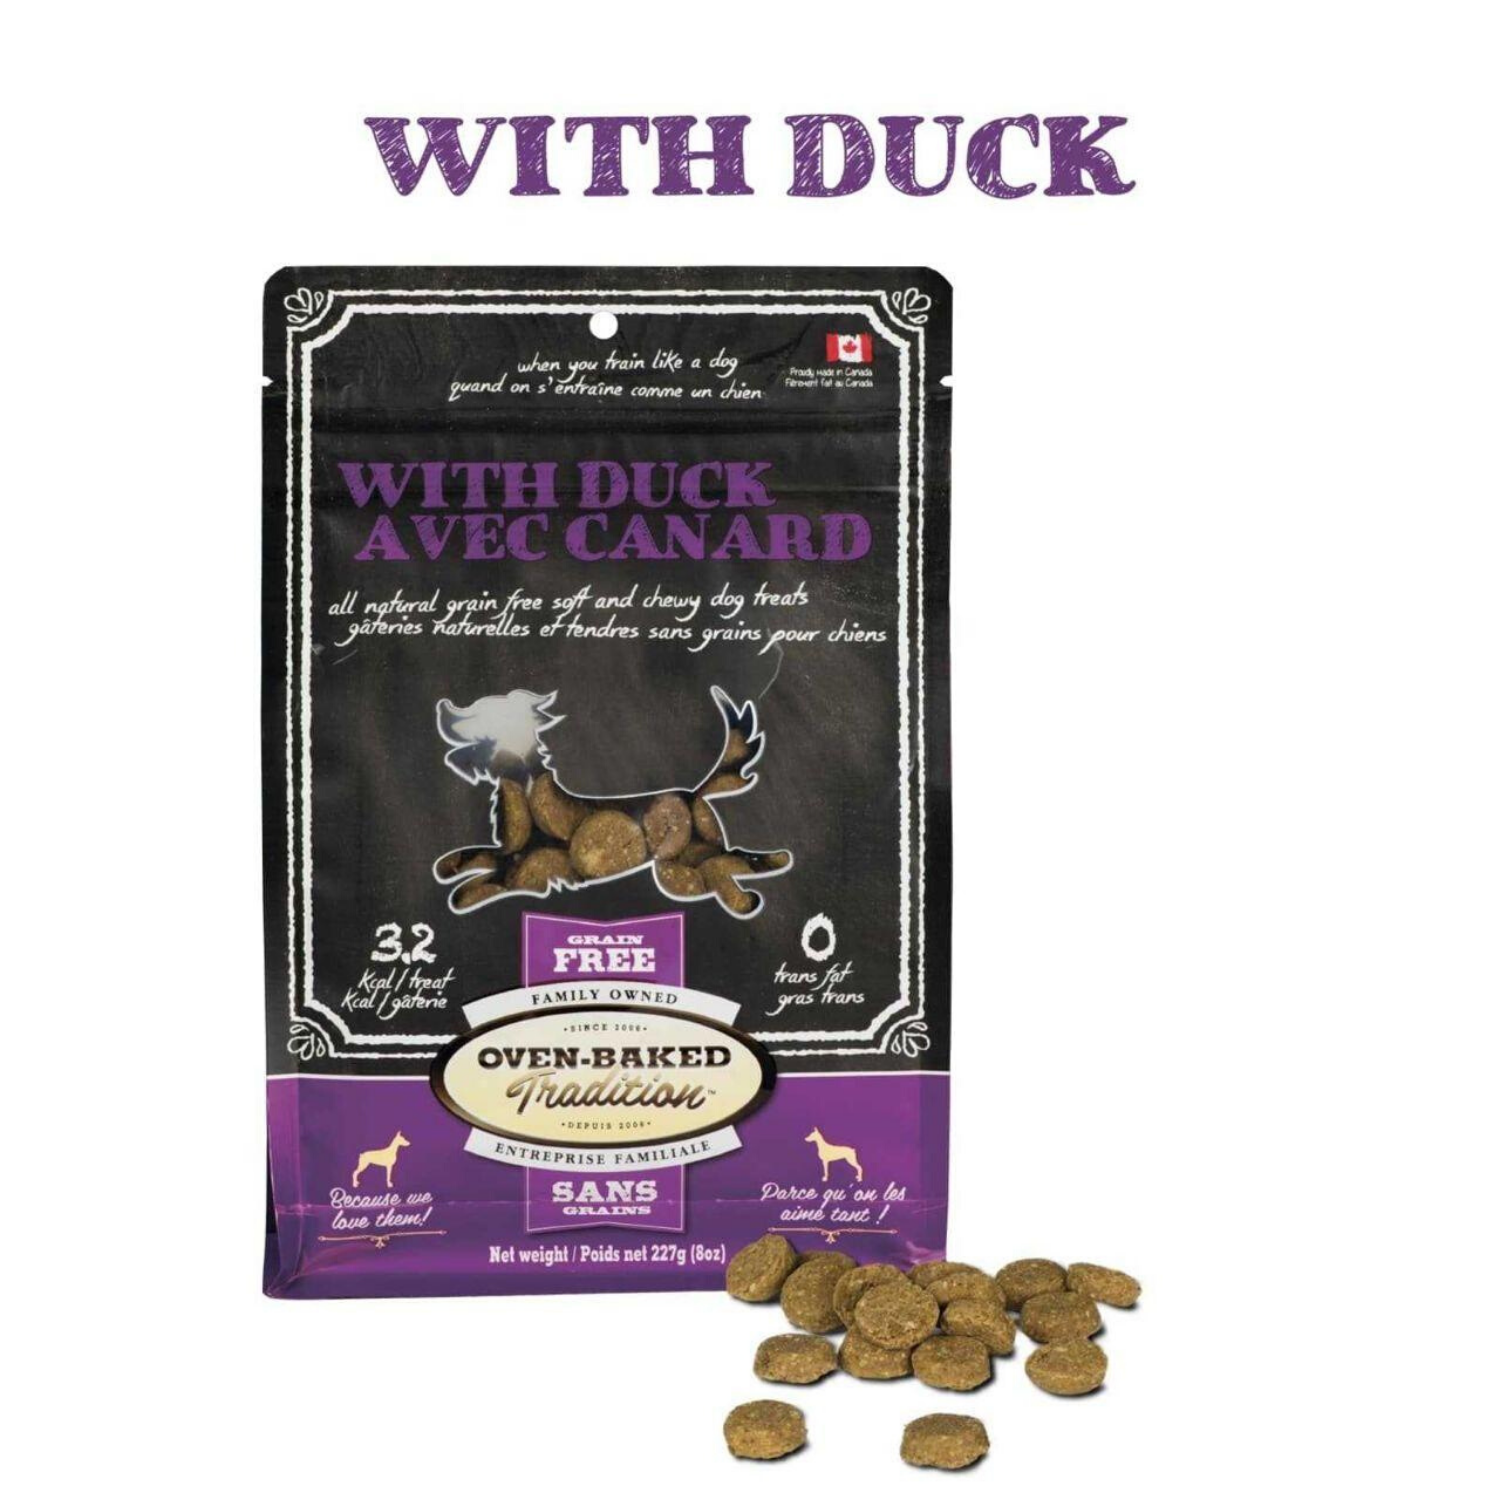 Oven-Baked Tradition Dog Treats (Duck) - 227g